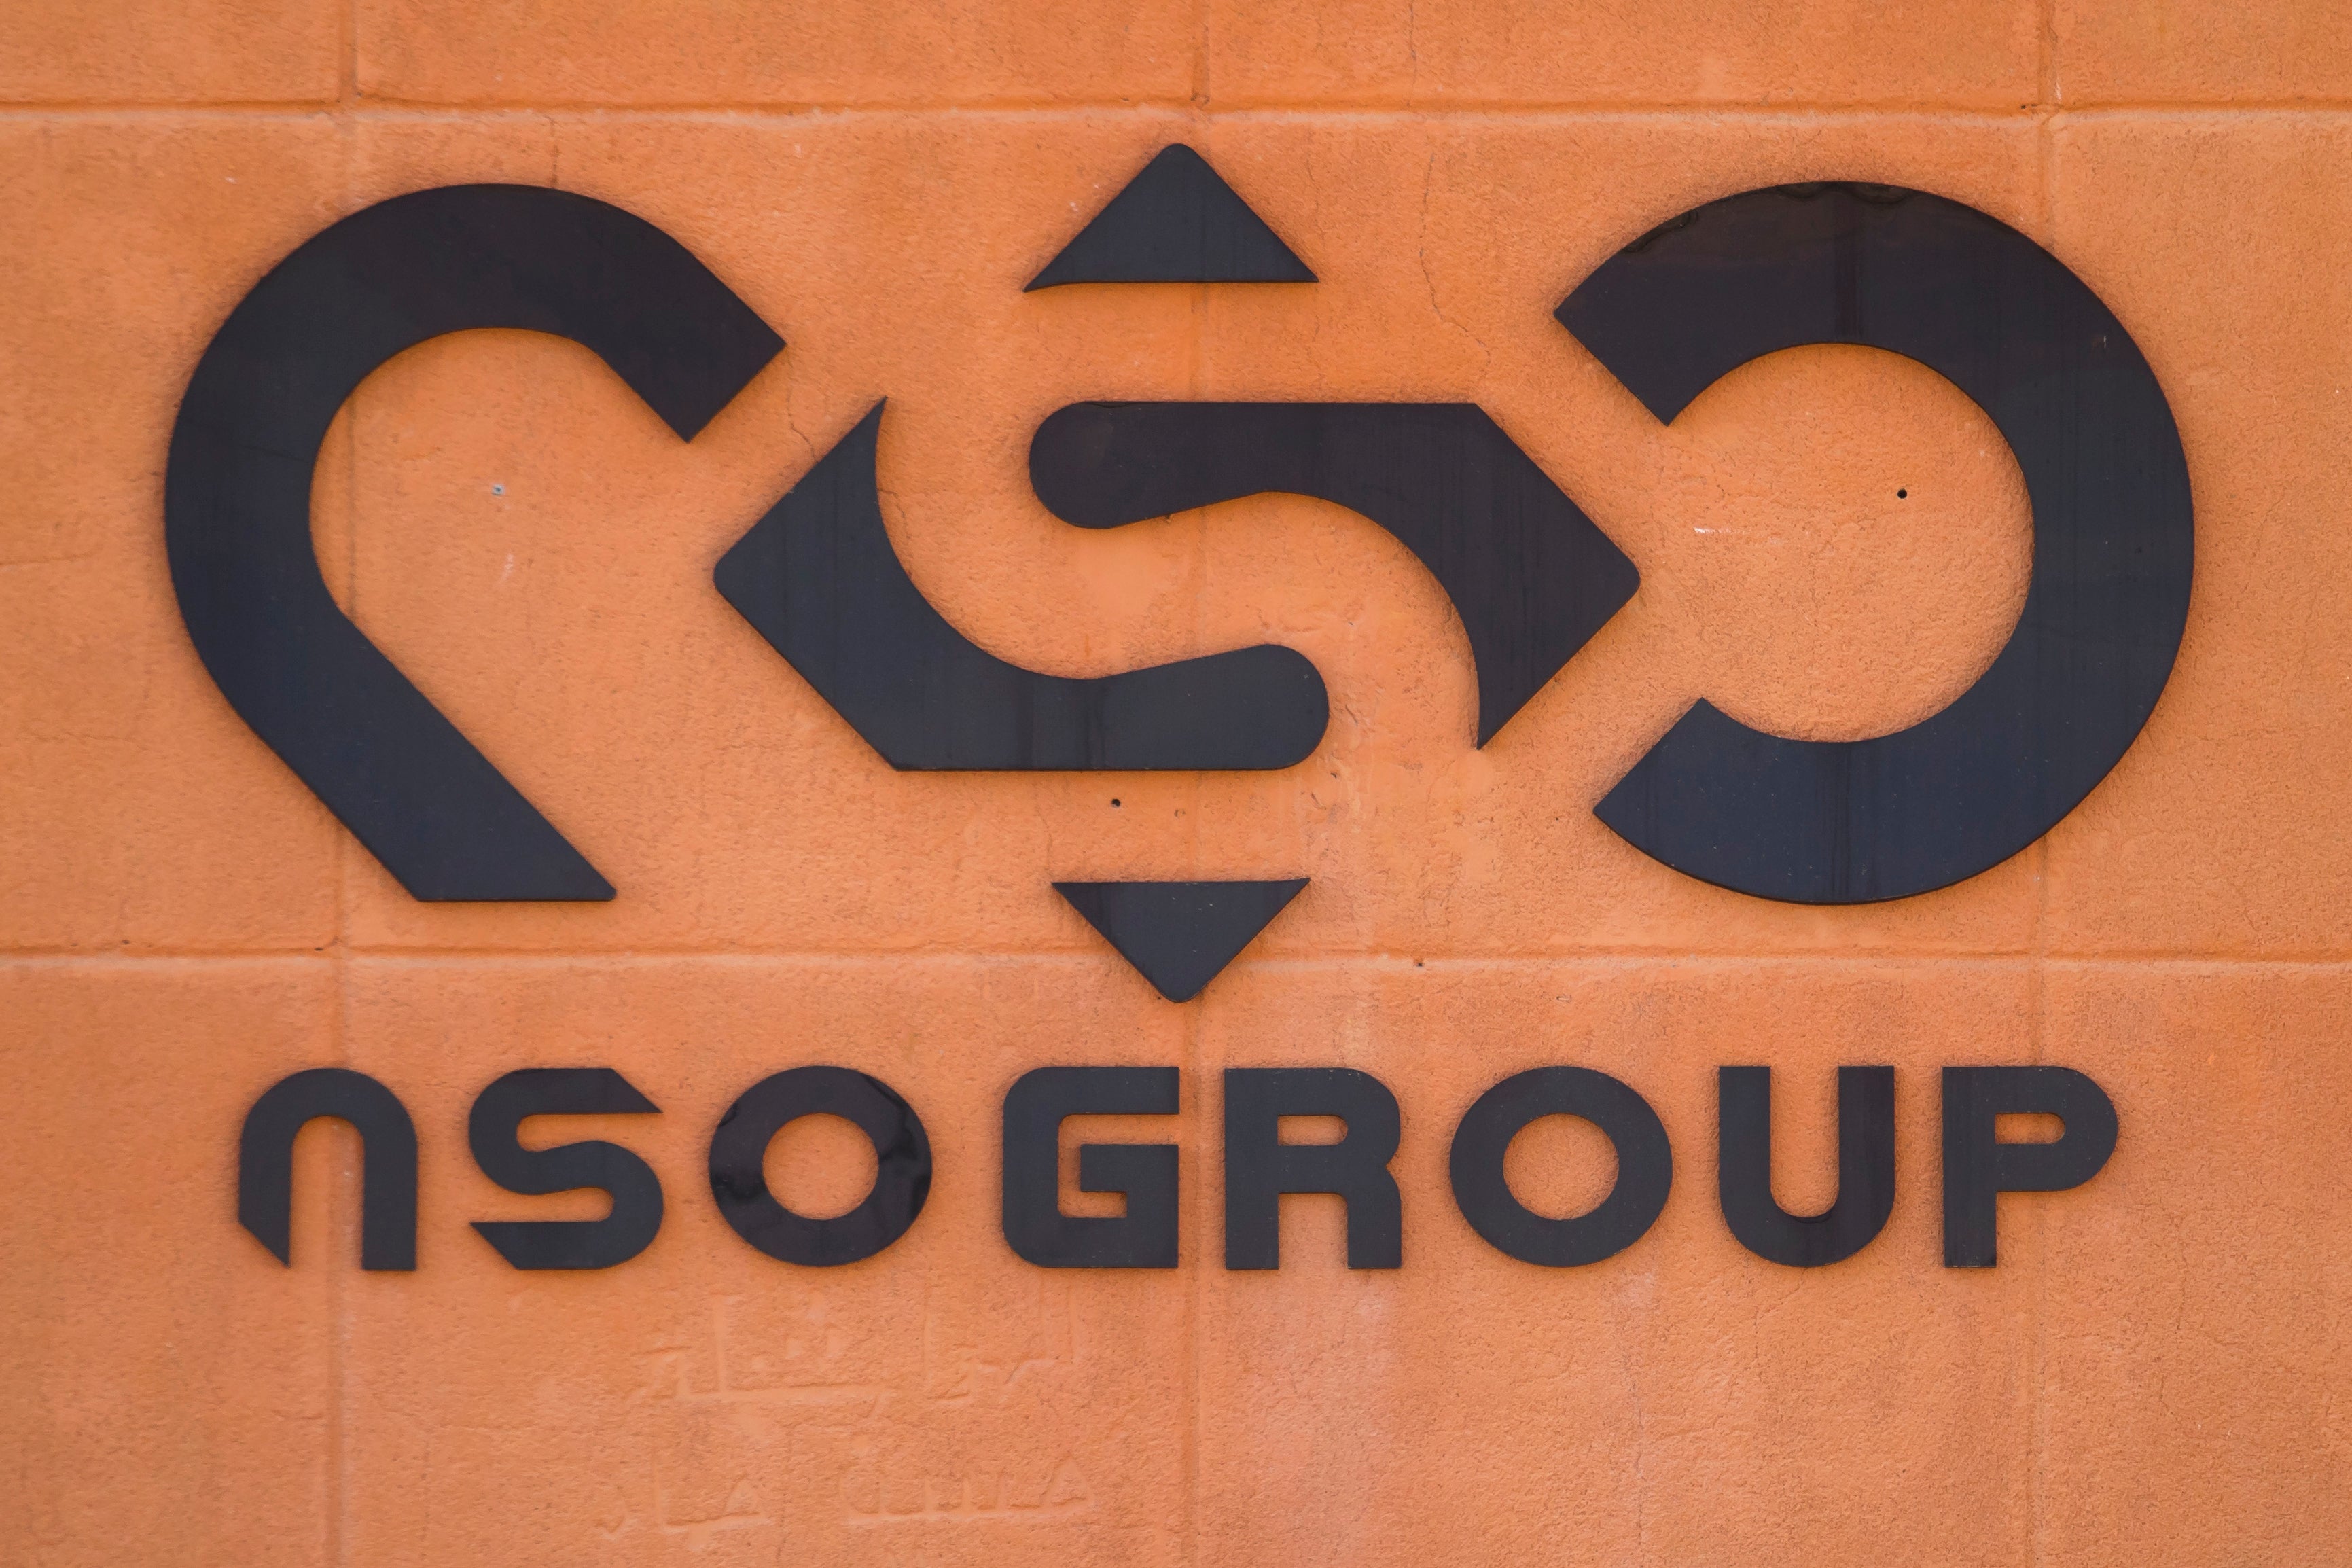 File photo: The logo of Israeli cyber company NSO Group seen at one of its branches in the Arava Desert on 11 November 2021 in Sapir, Israel